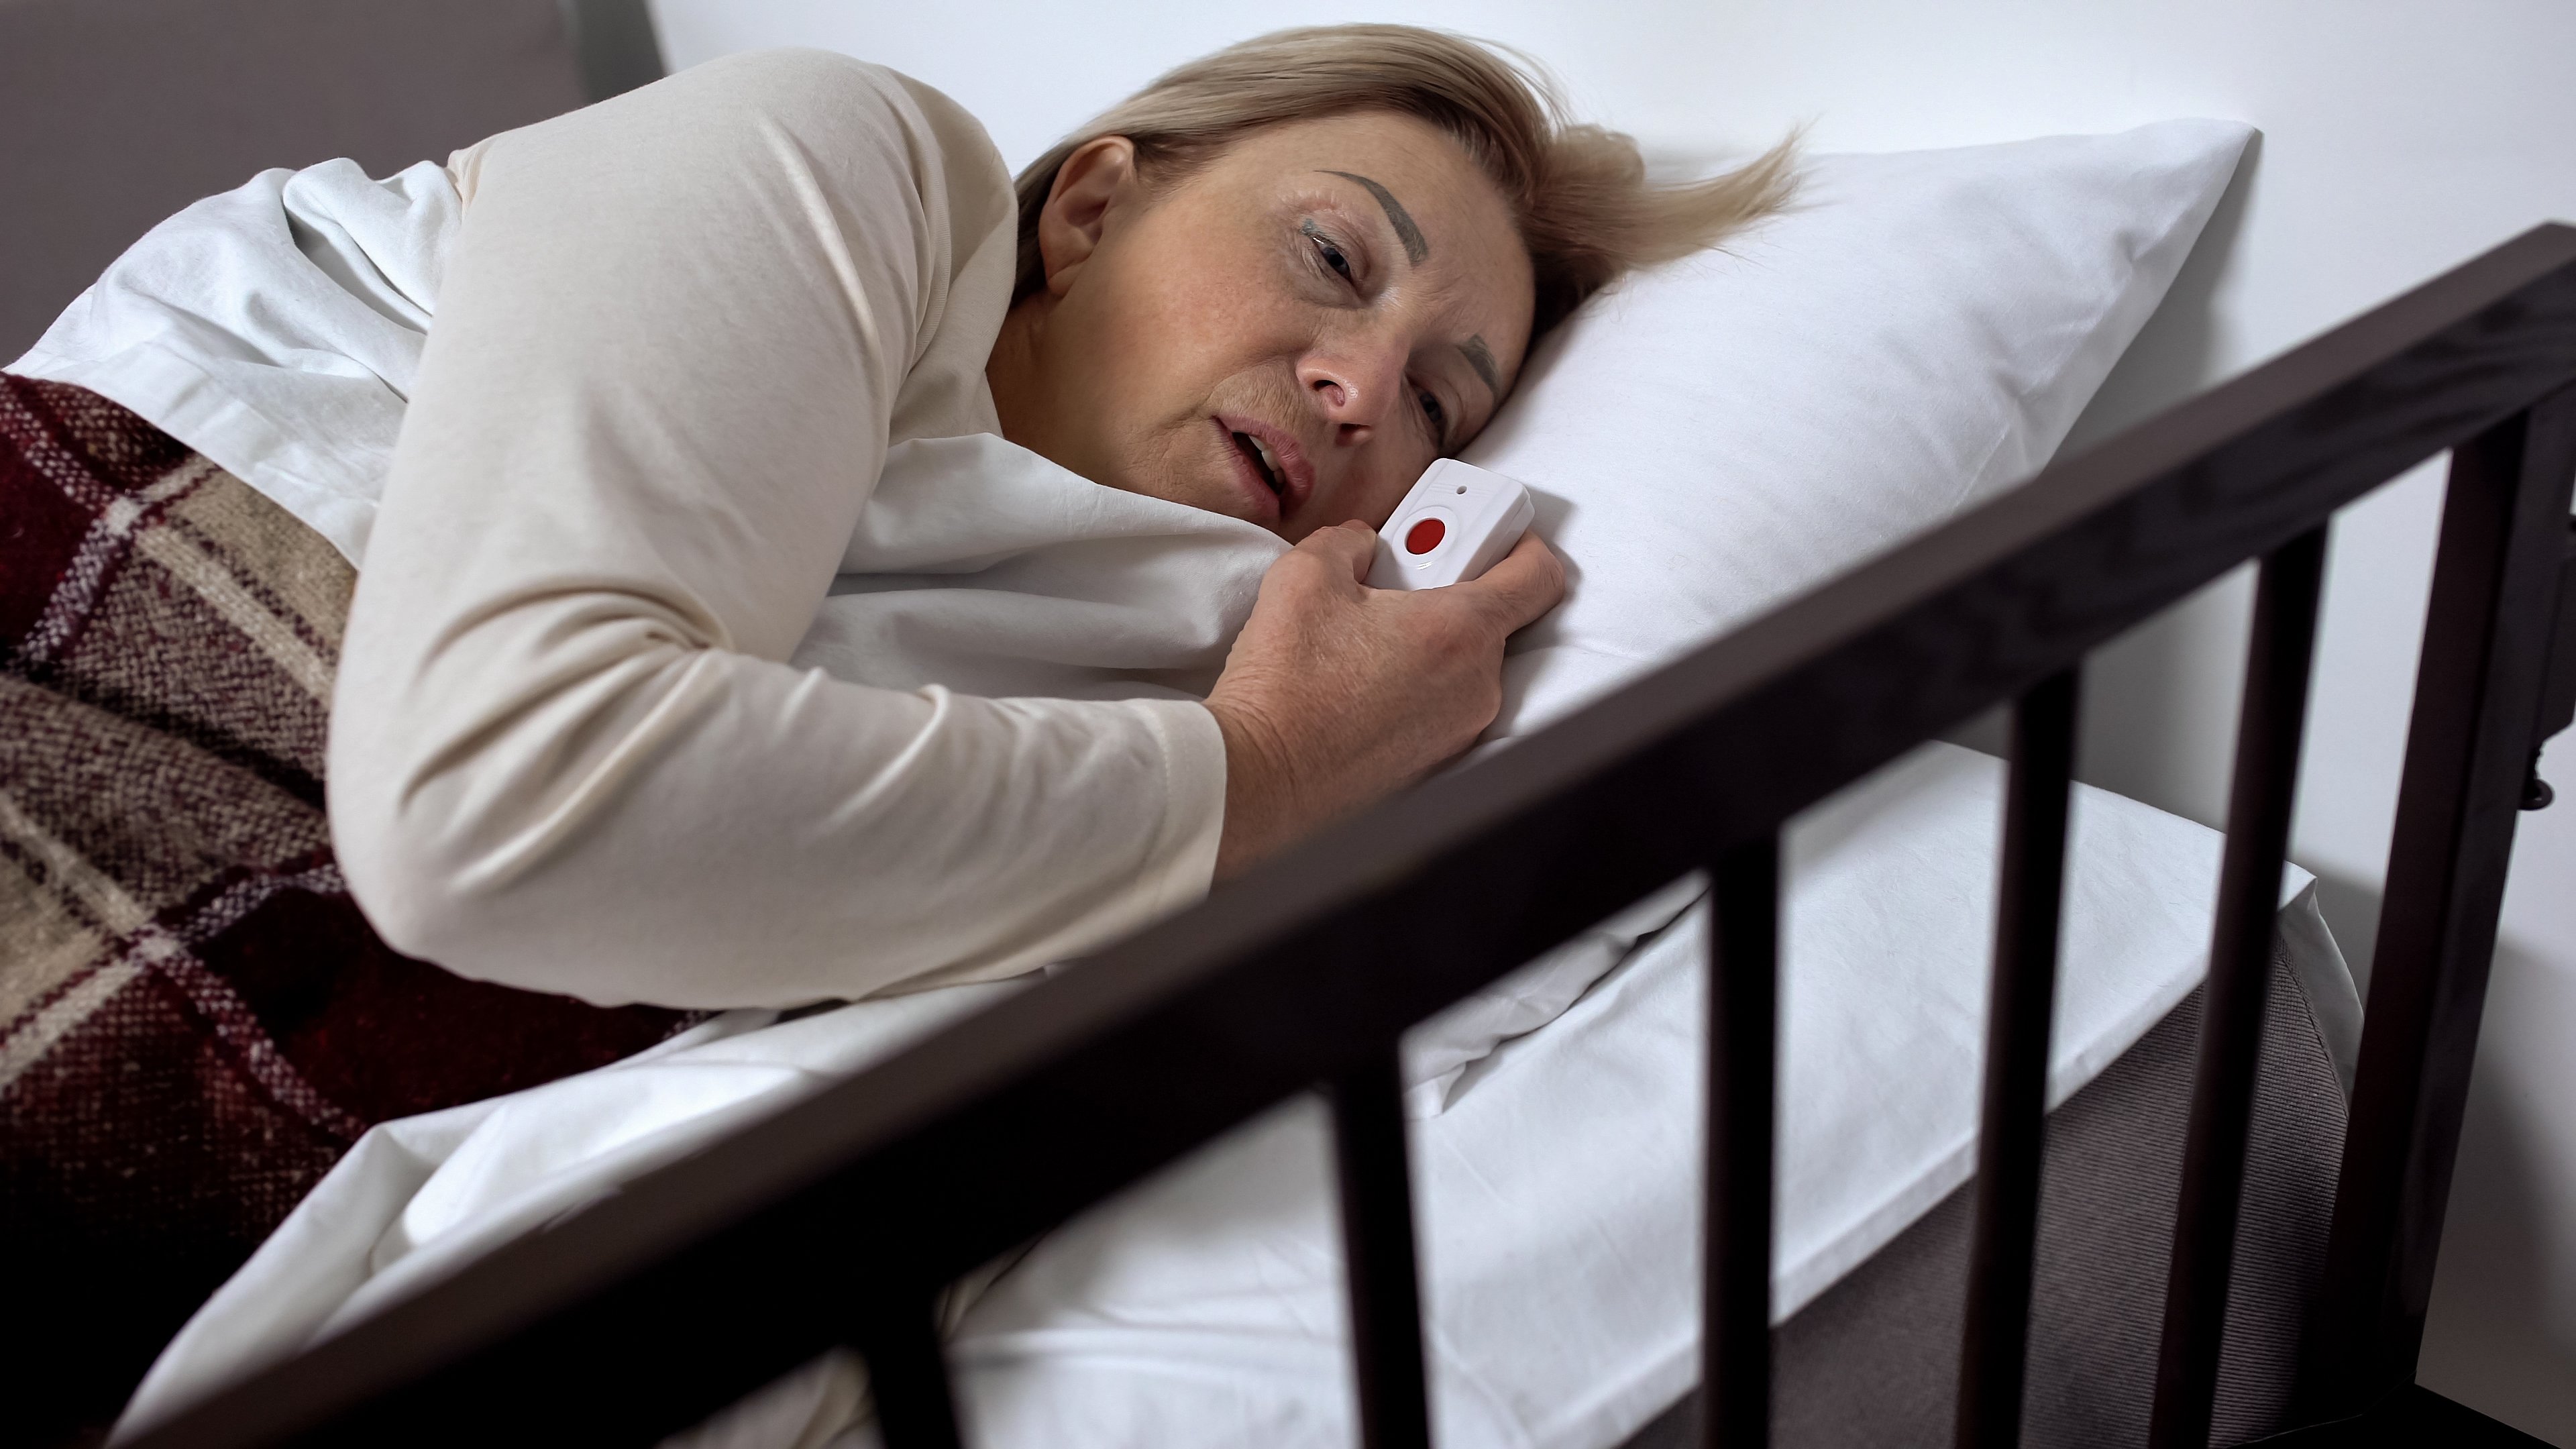 Woman lying in hospital bed holding call button